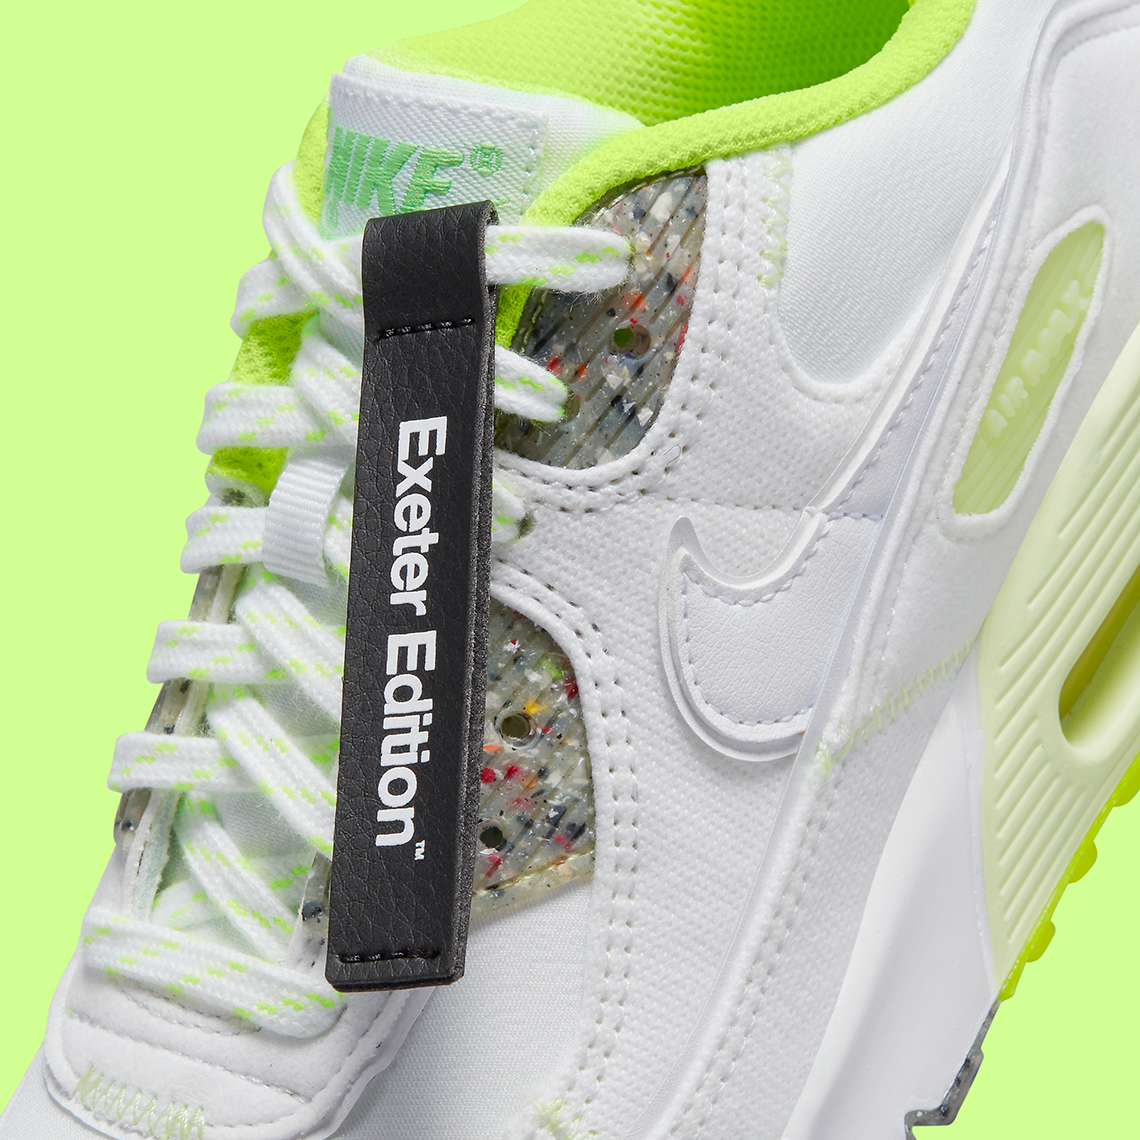 Nike Air Max 90 Exeter Edition Dh1989 001 8